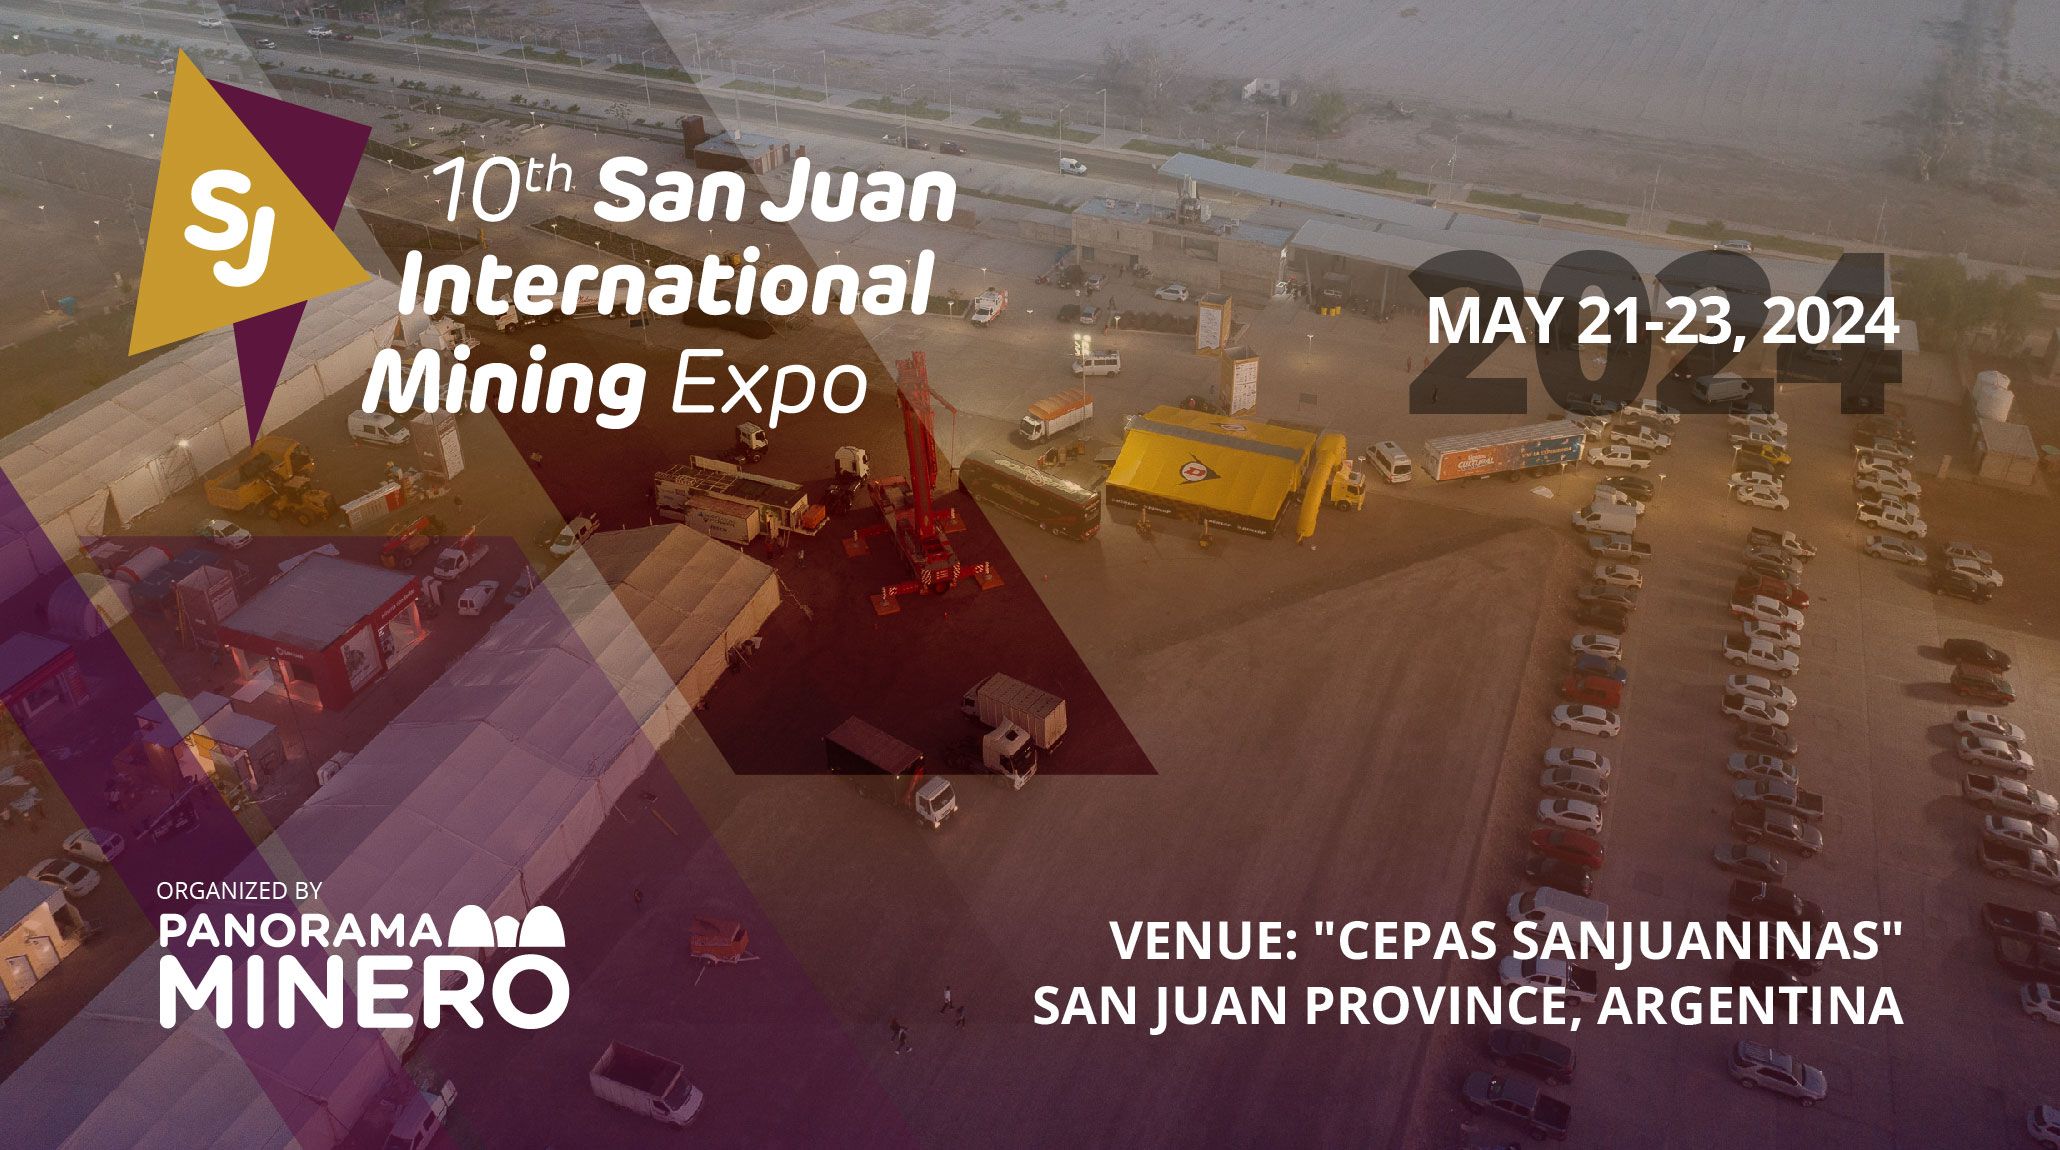 Argentina: The most important mining event of the year will take place in San Juan from May 21 to 23